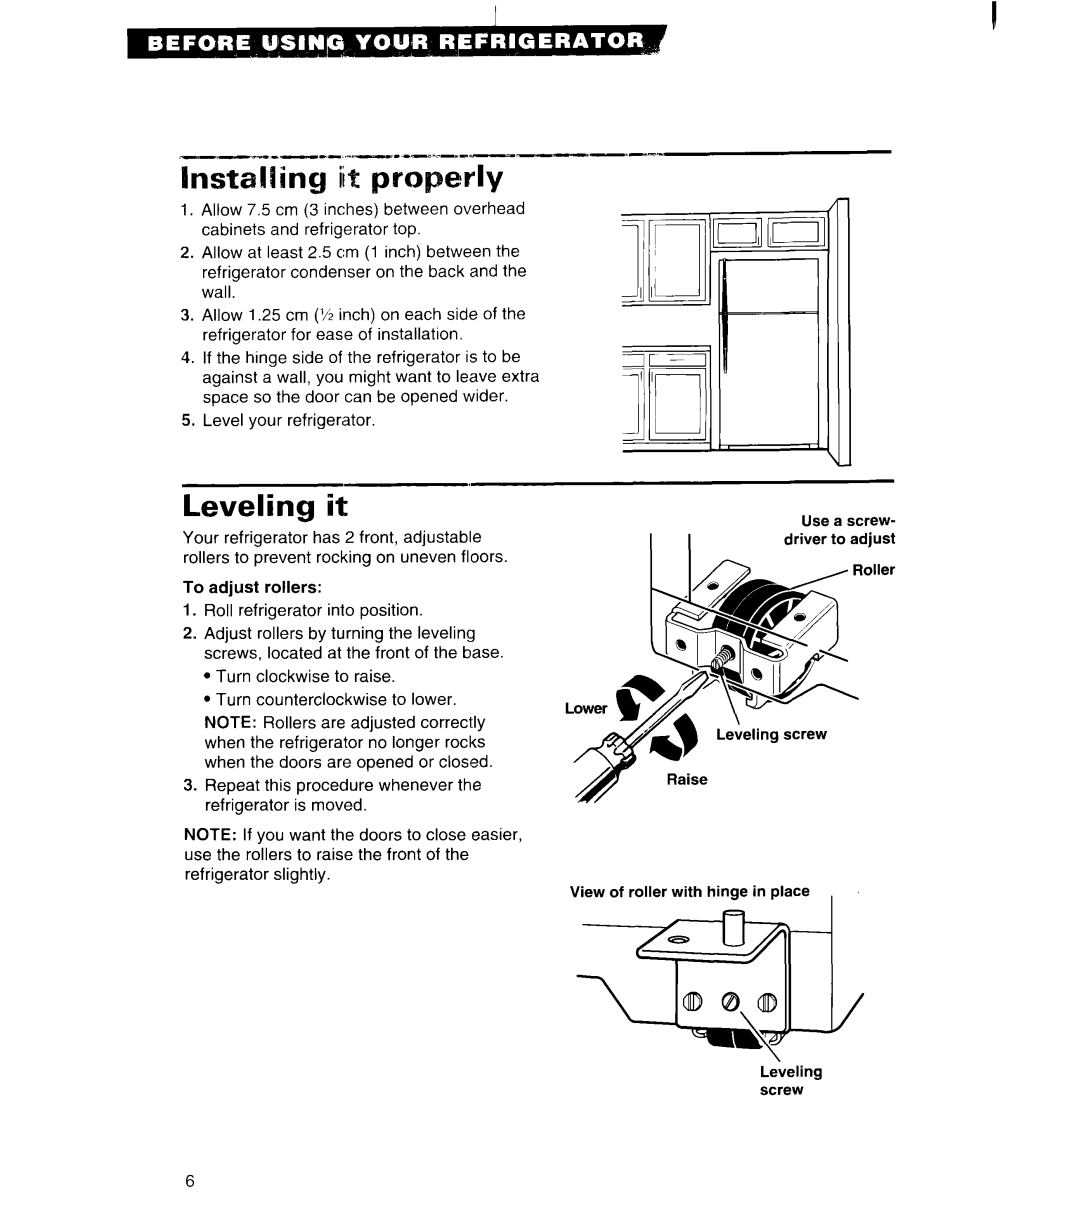 Whirlpool 3VET16GK important safety instructions Installling iit pm, Leveling it 